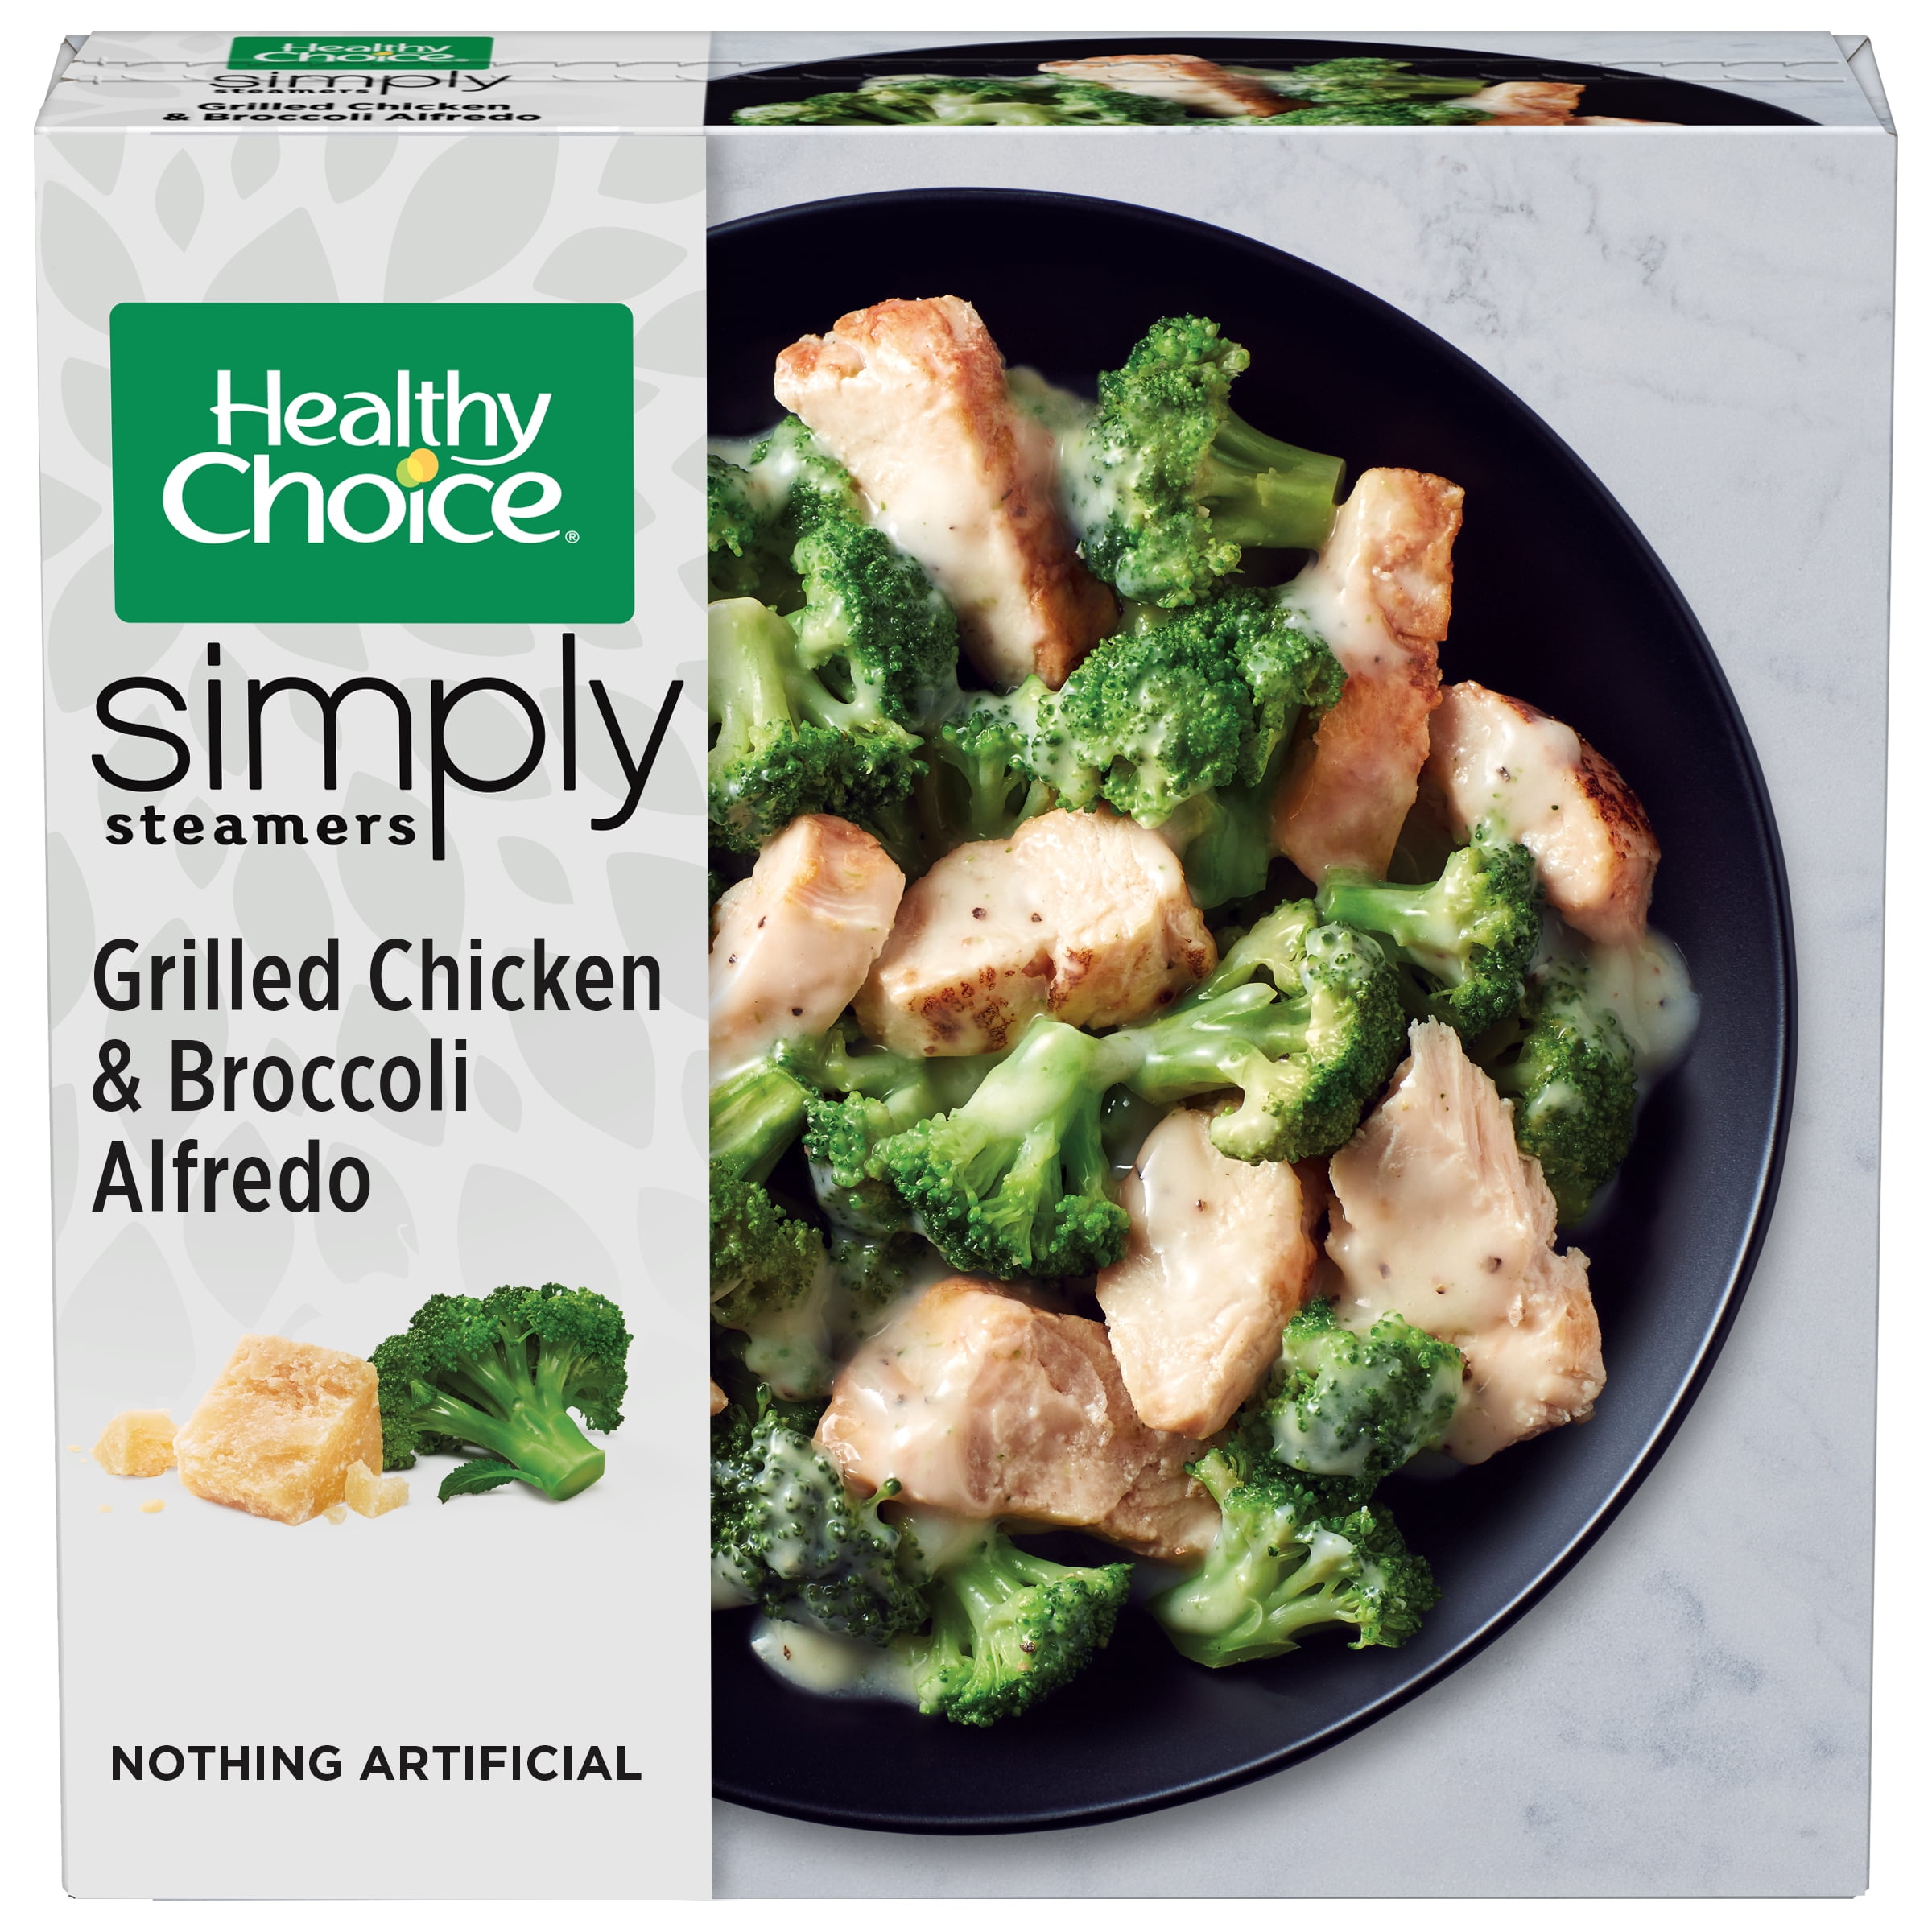 Healthy Choice Simply Steamers Grilled Chicken & Broccoli Alfredo Frozen Meal, 9.15 oz (Frozen)